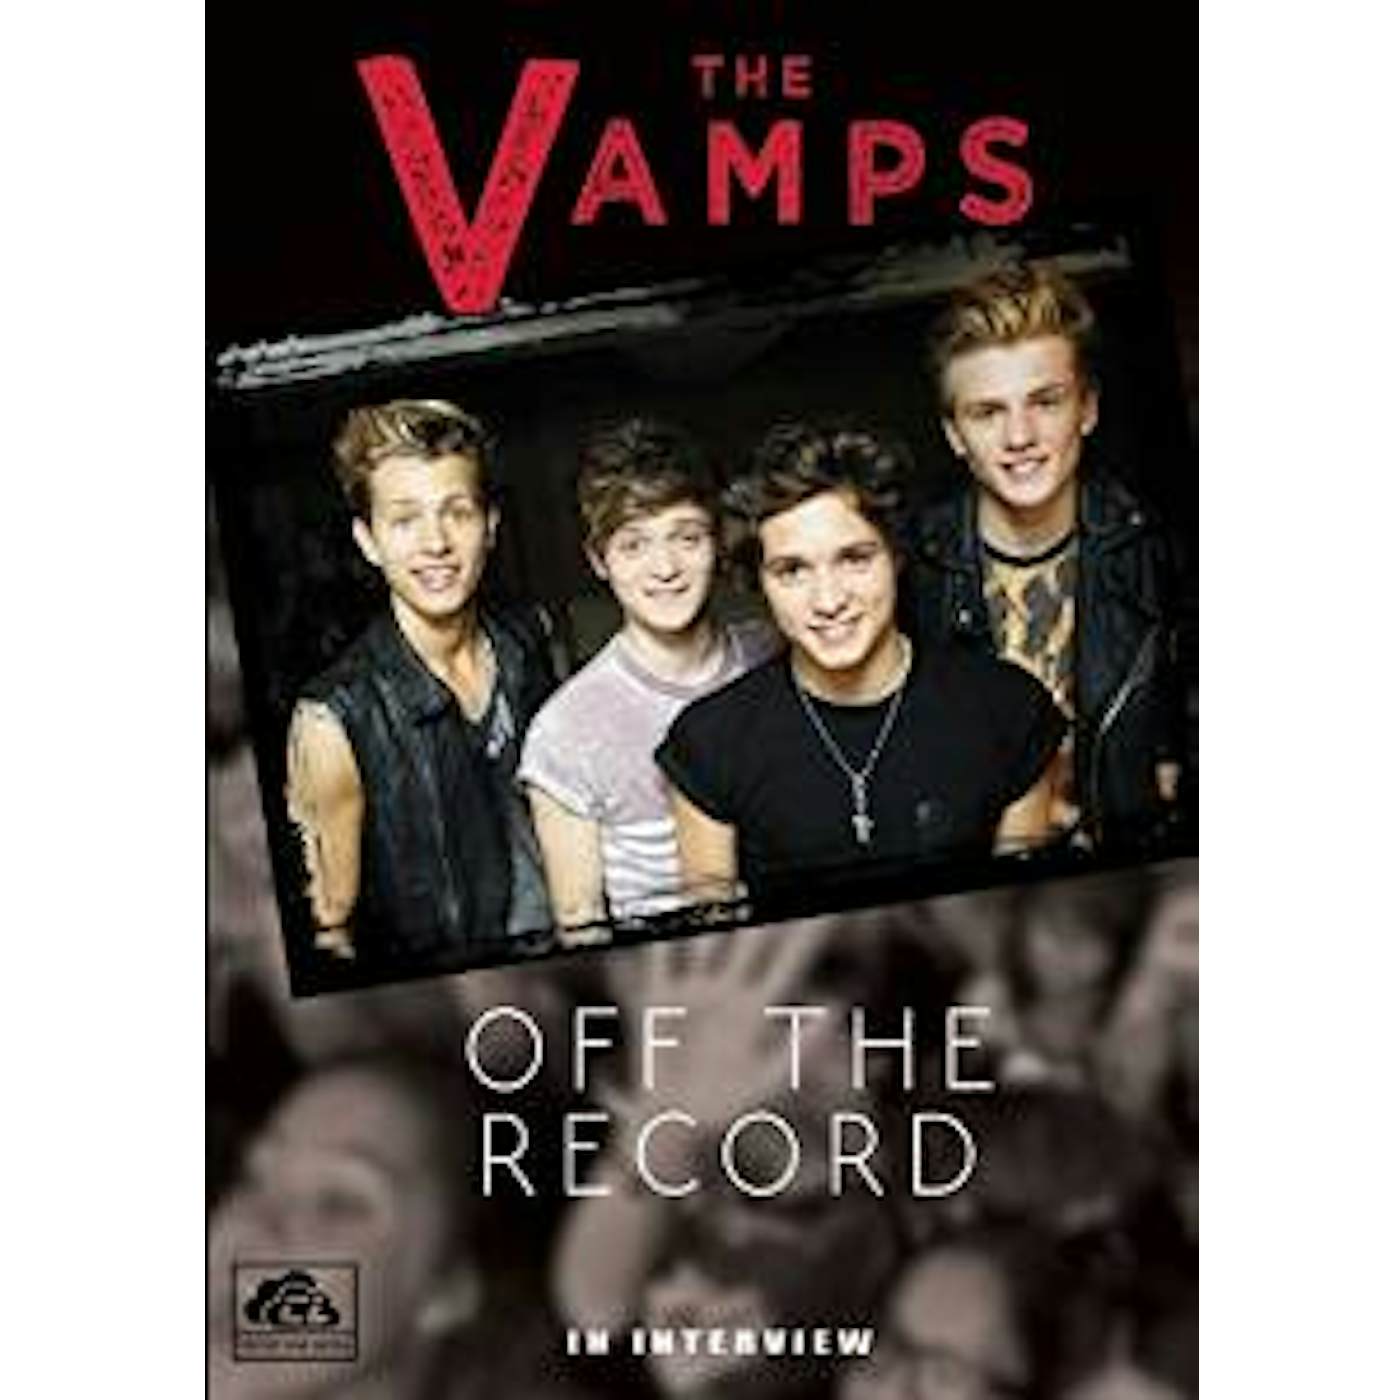 The Vamps OFF THE RECORD DVD